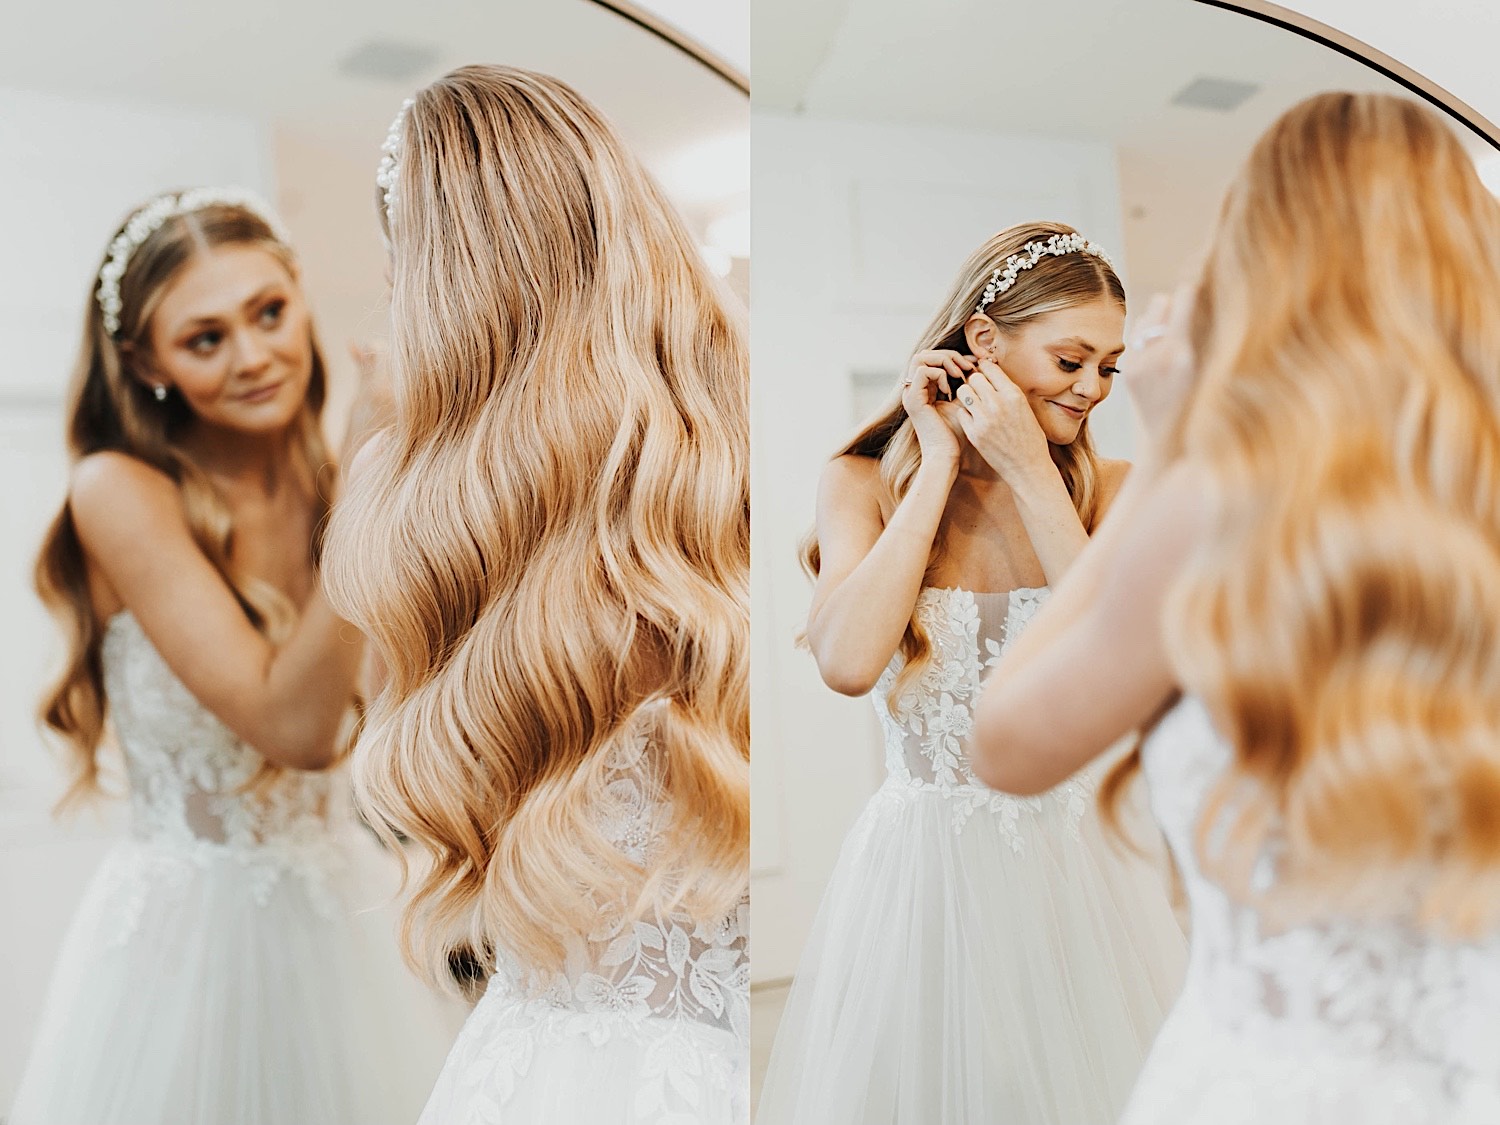 2 photos side by side of a bride standing in a mirror in her wedding dress adjusting her earrings